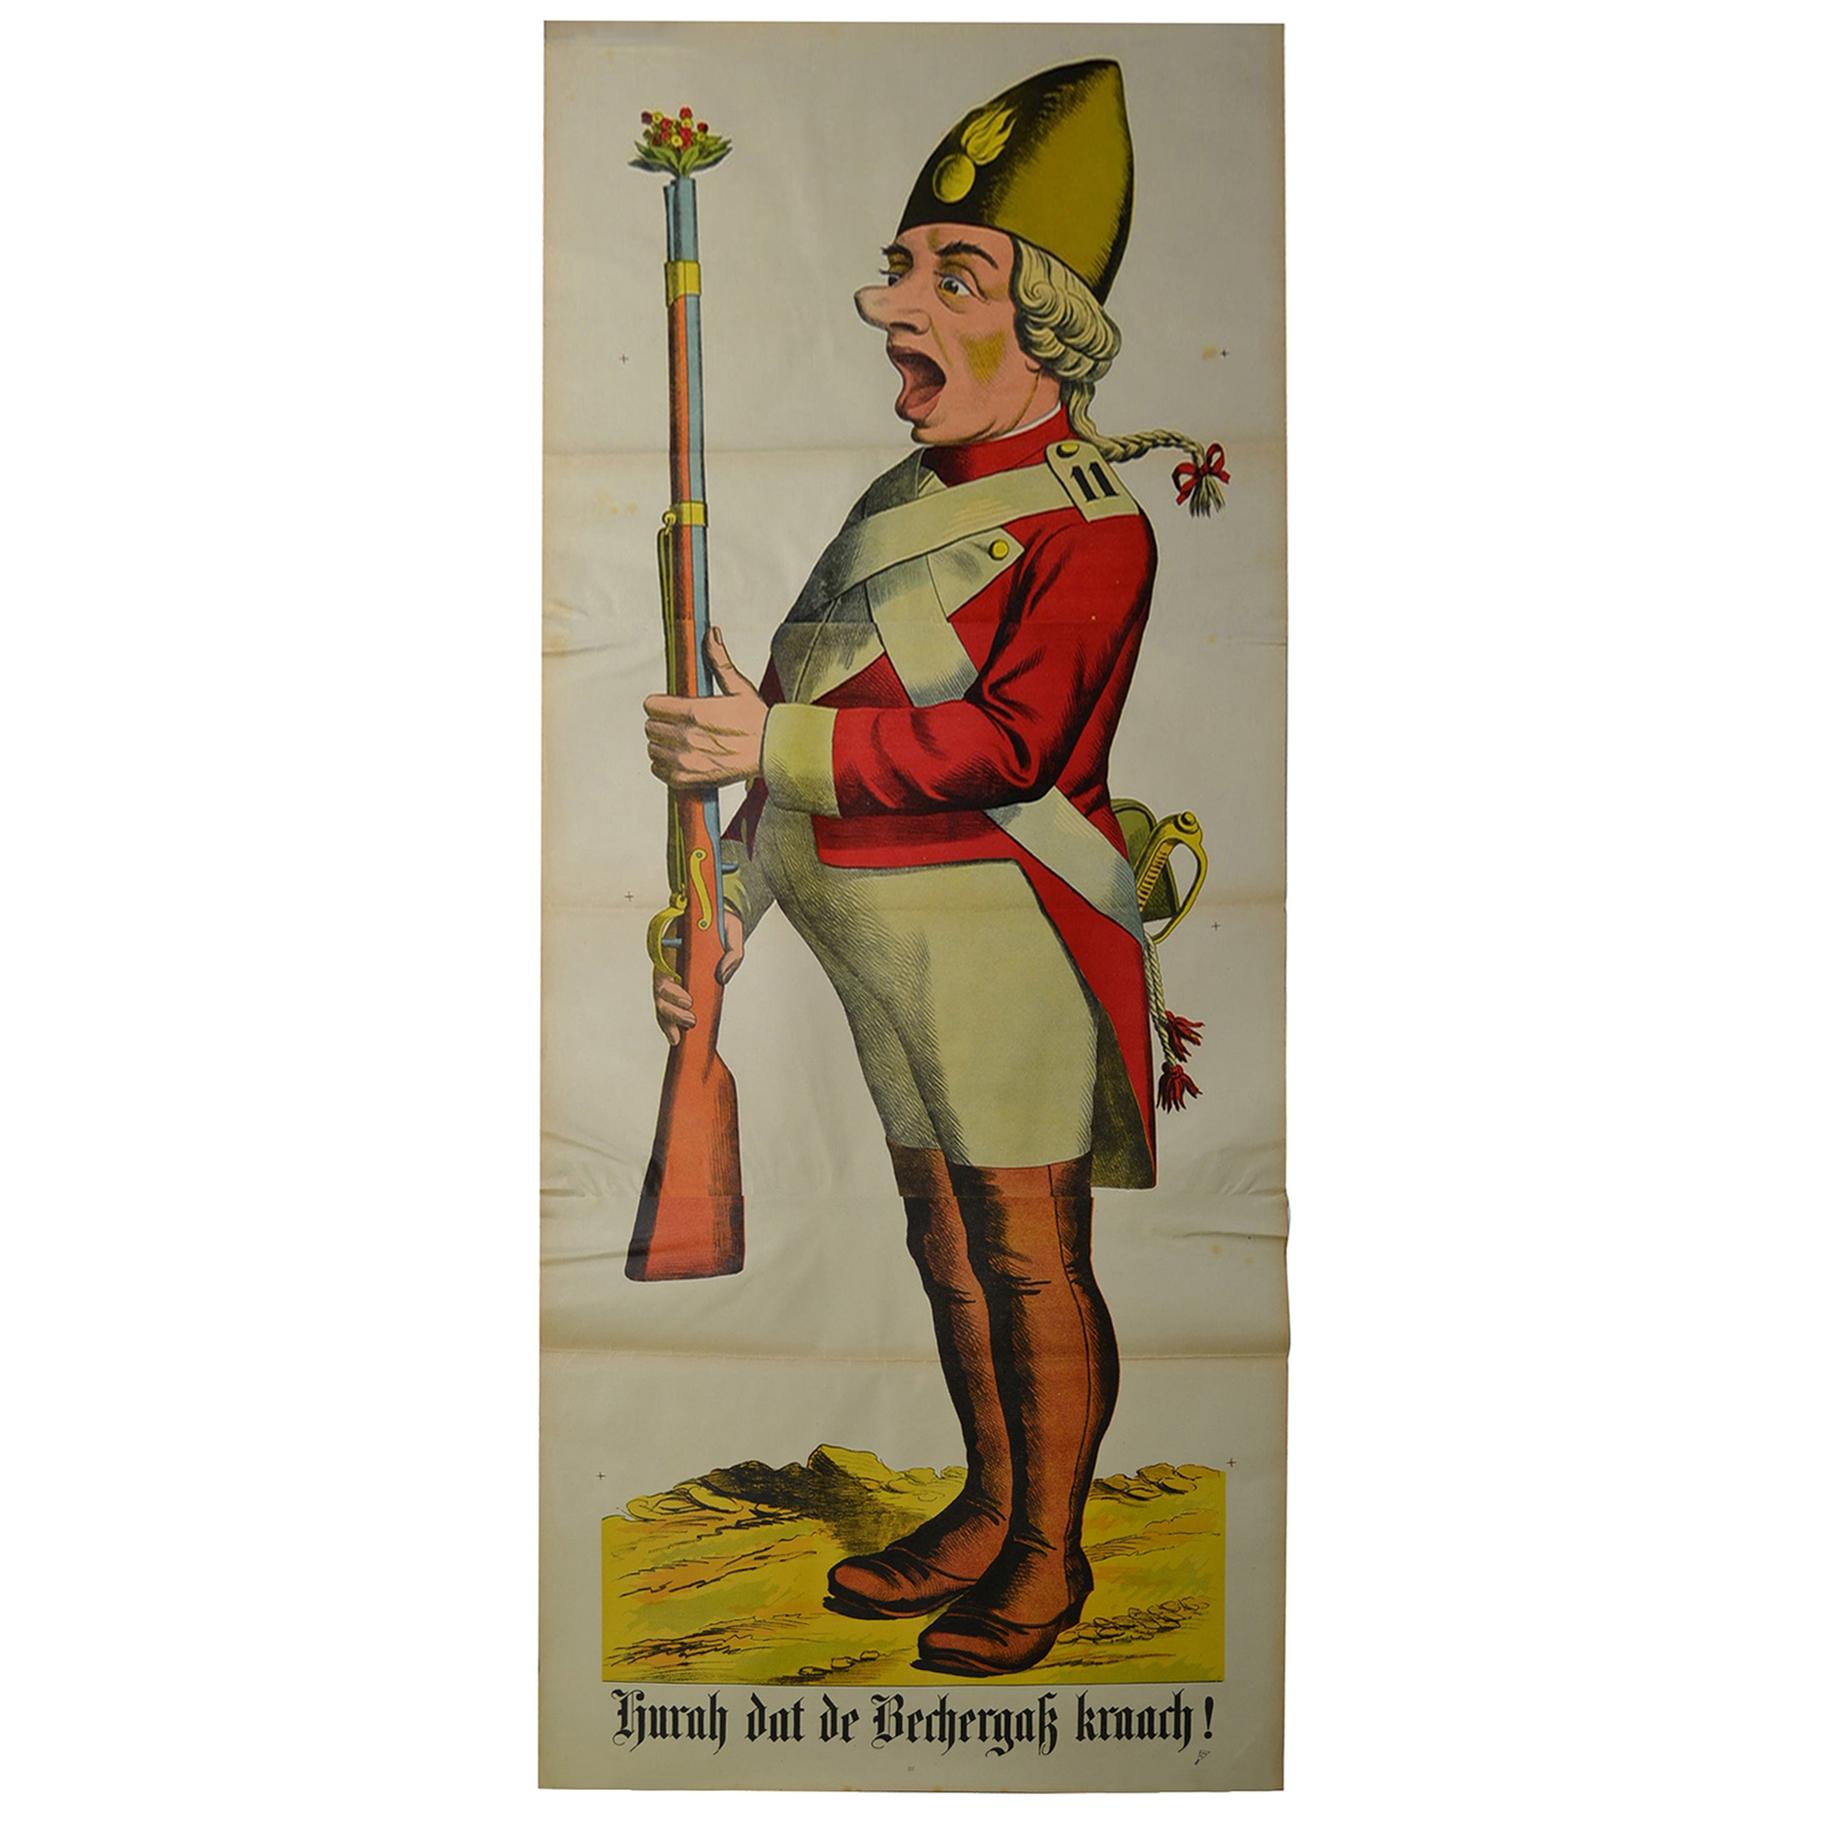 1880s European Life-Size Stone Lithography Poster with an Officer